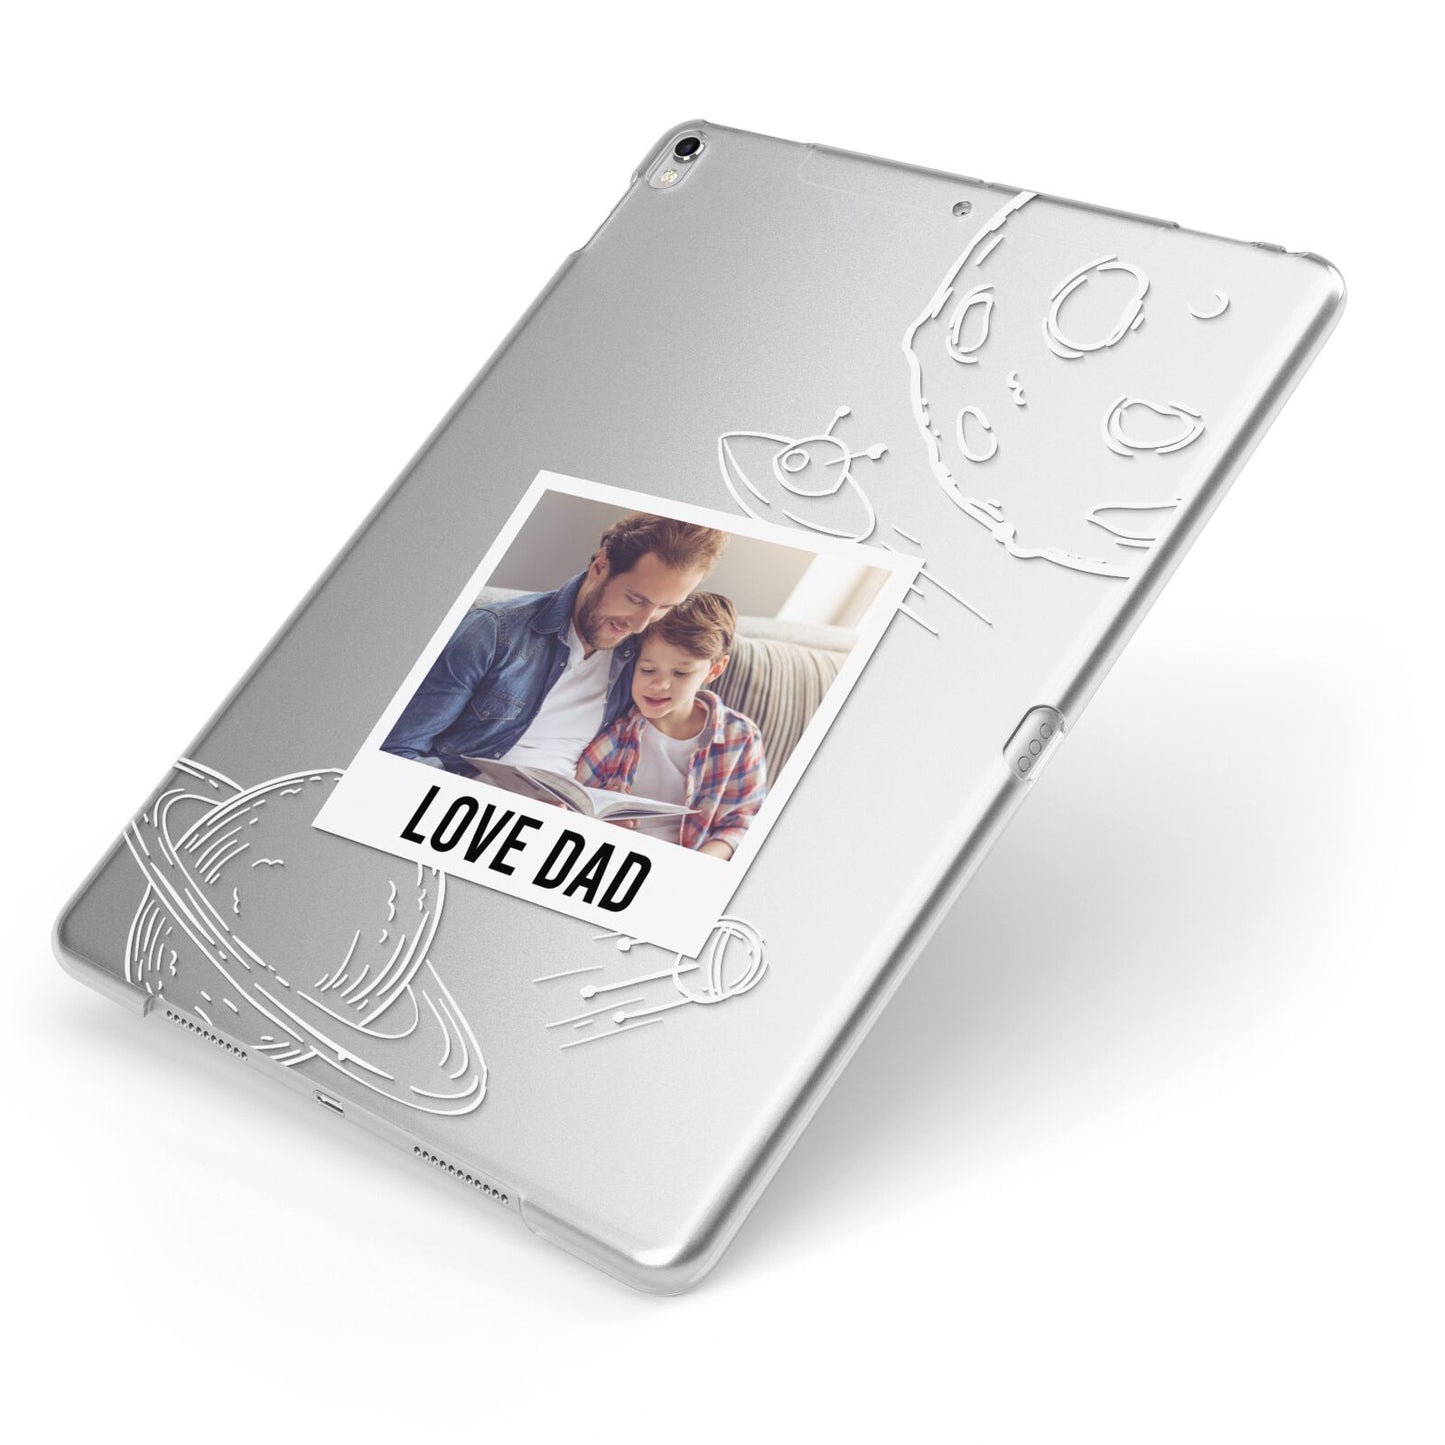 Personalised From Dad Photo Apple iPad Case on Silver iPad Side View